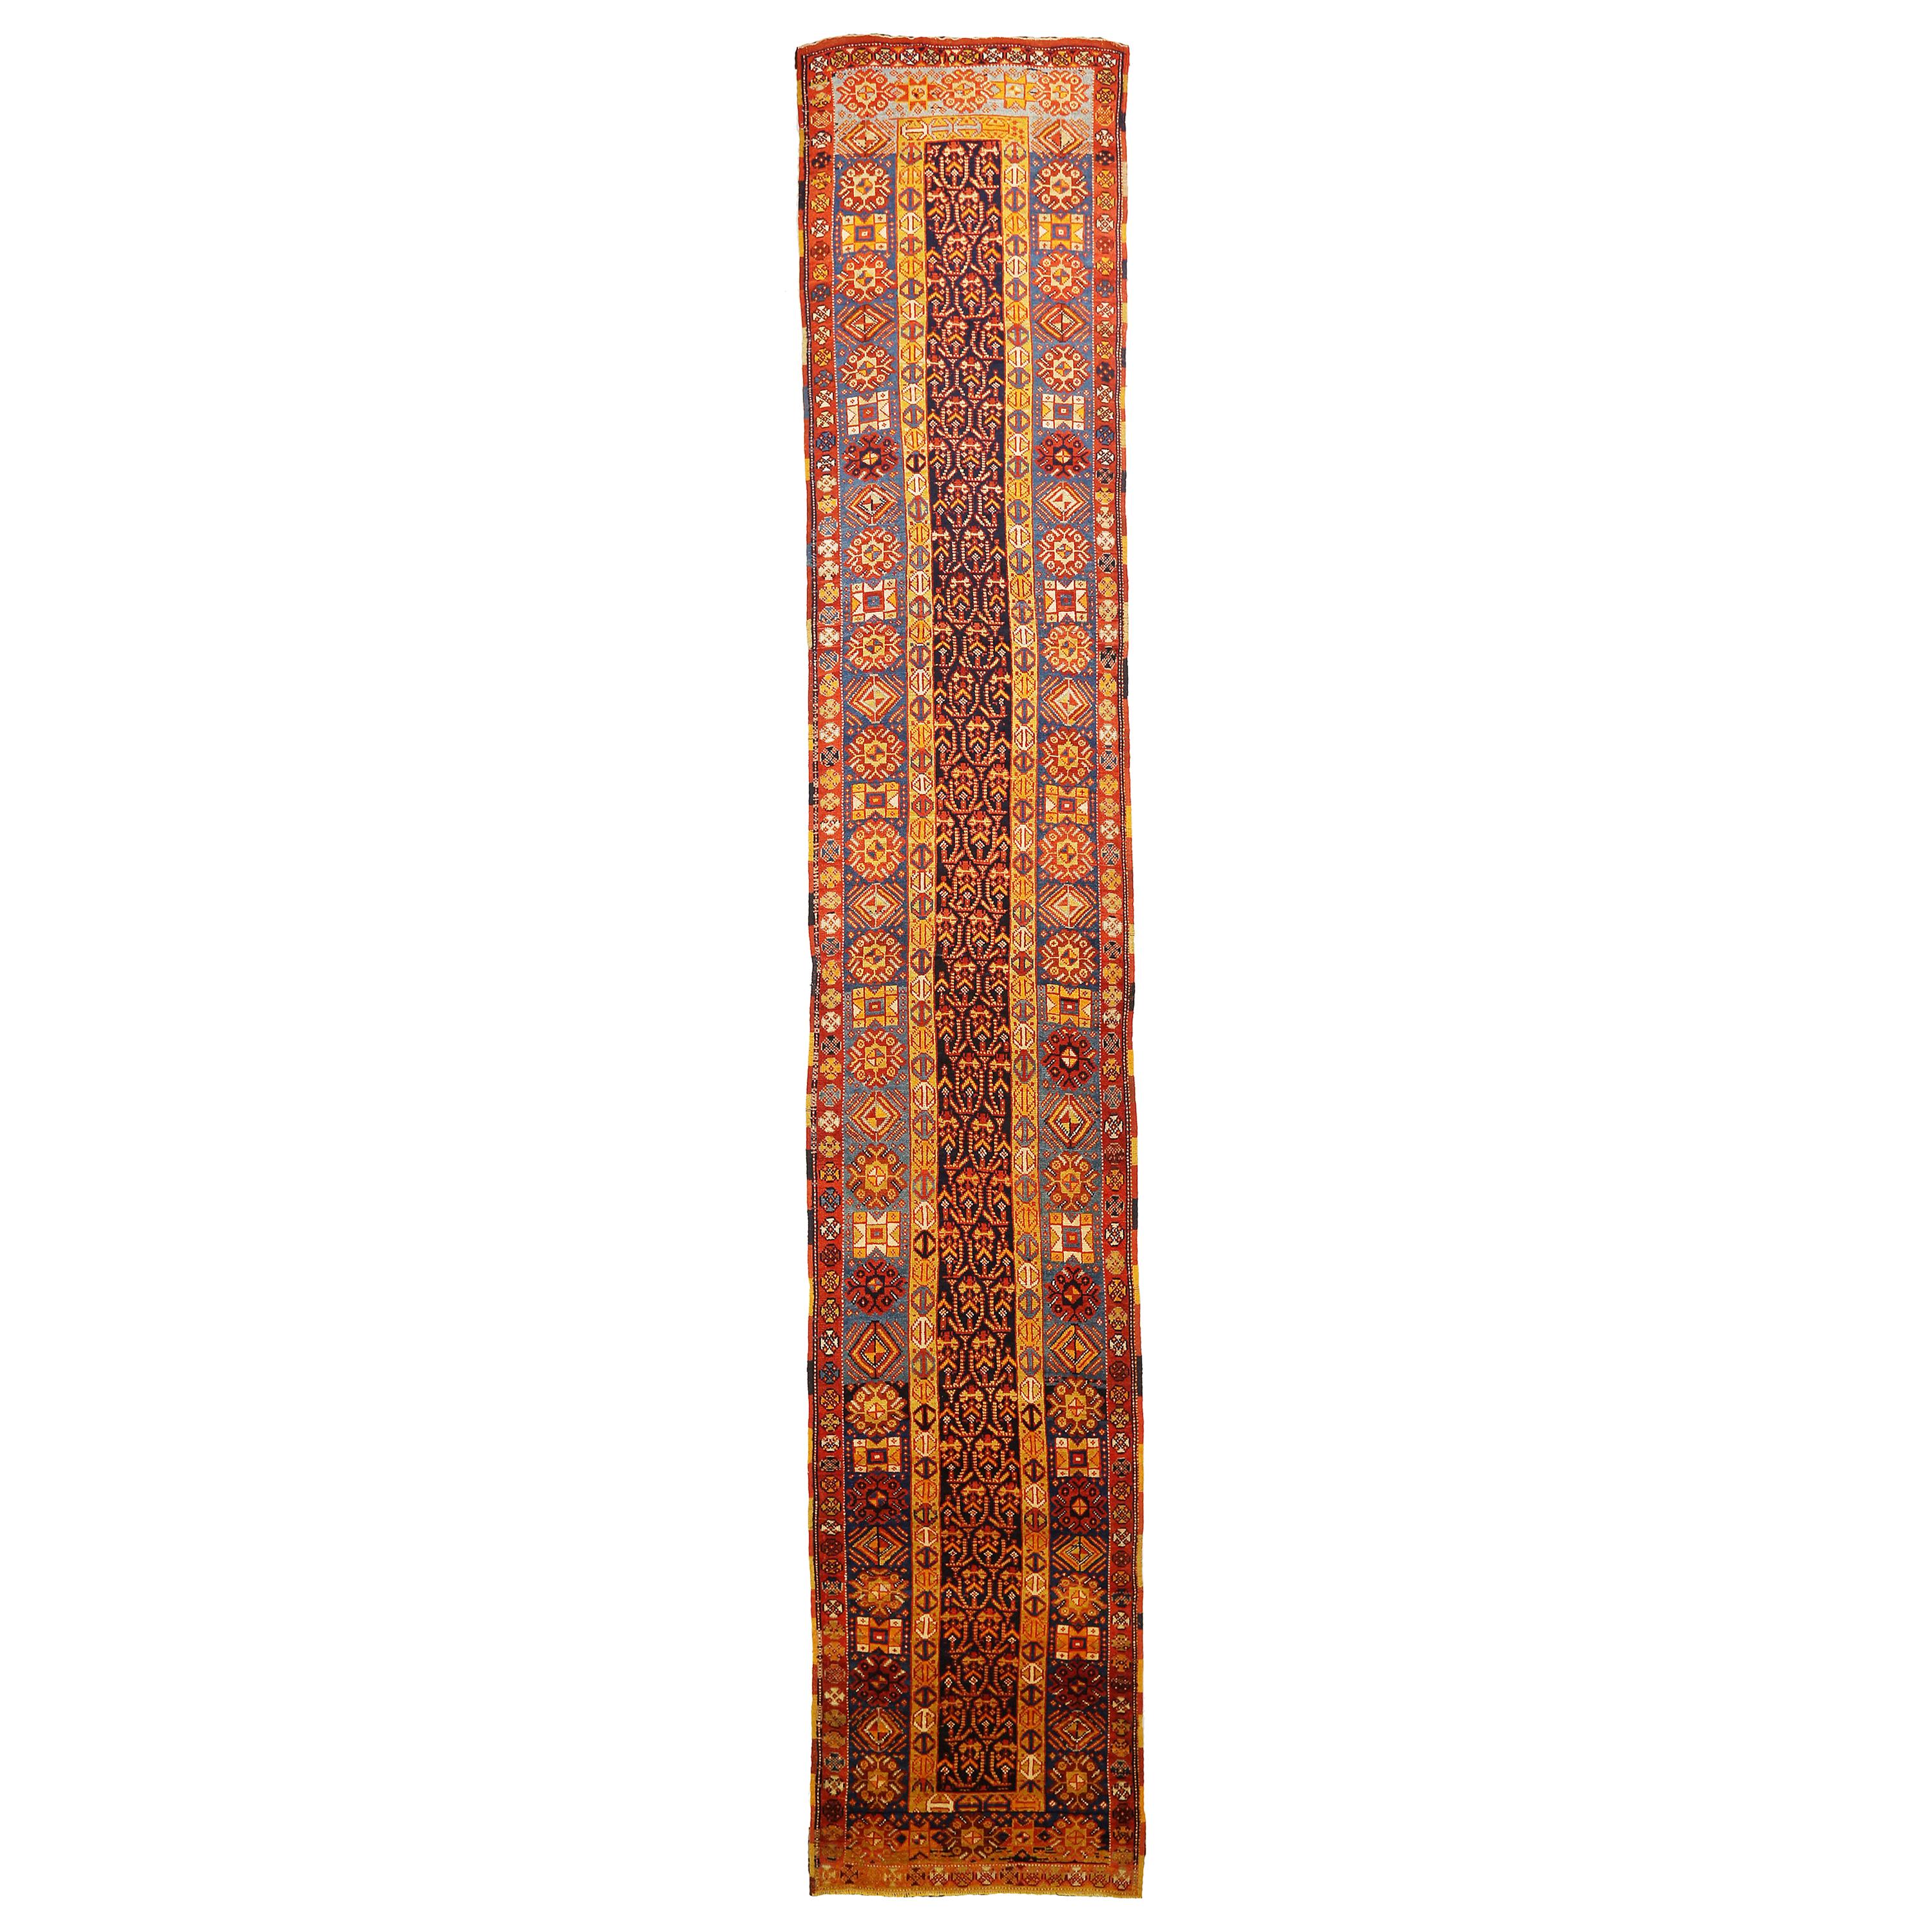 1900s Antique Turkish Oushak Runner Rug with Red and Orange Medallions For Sale